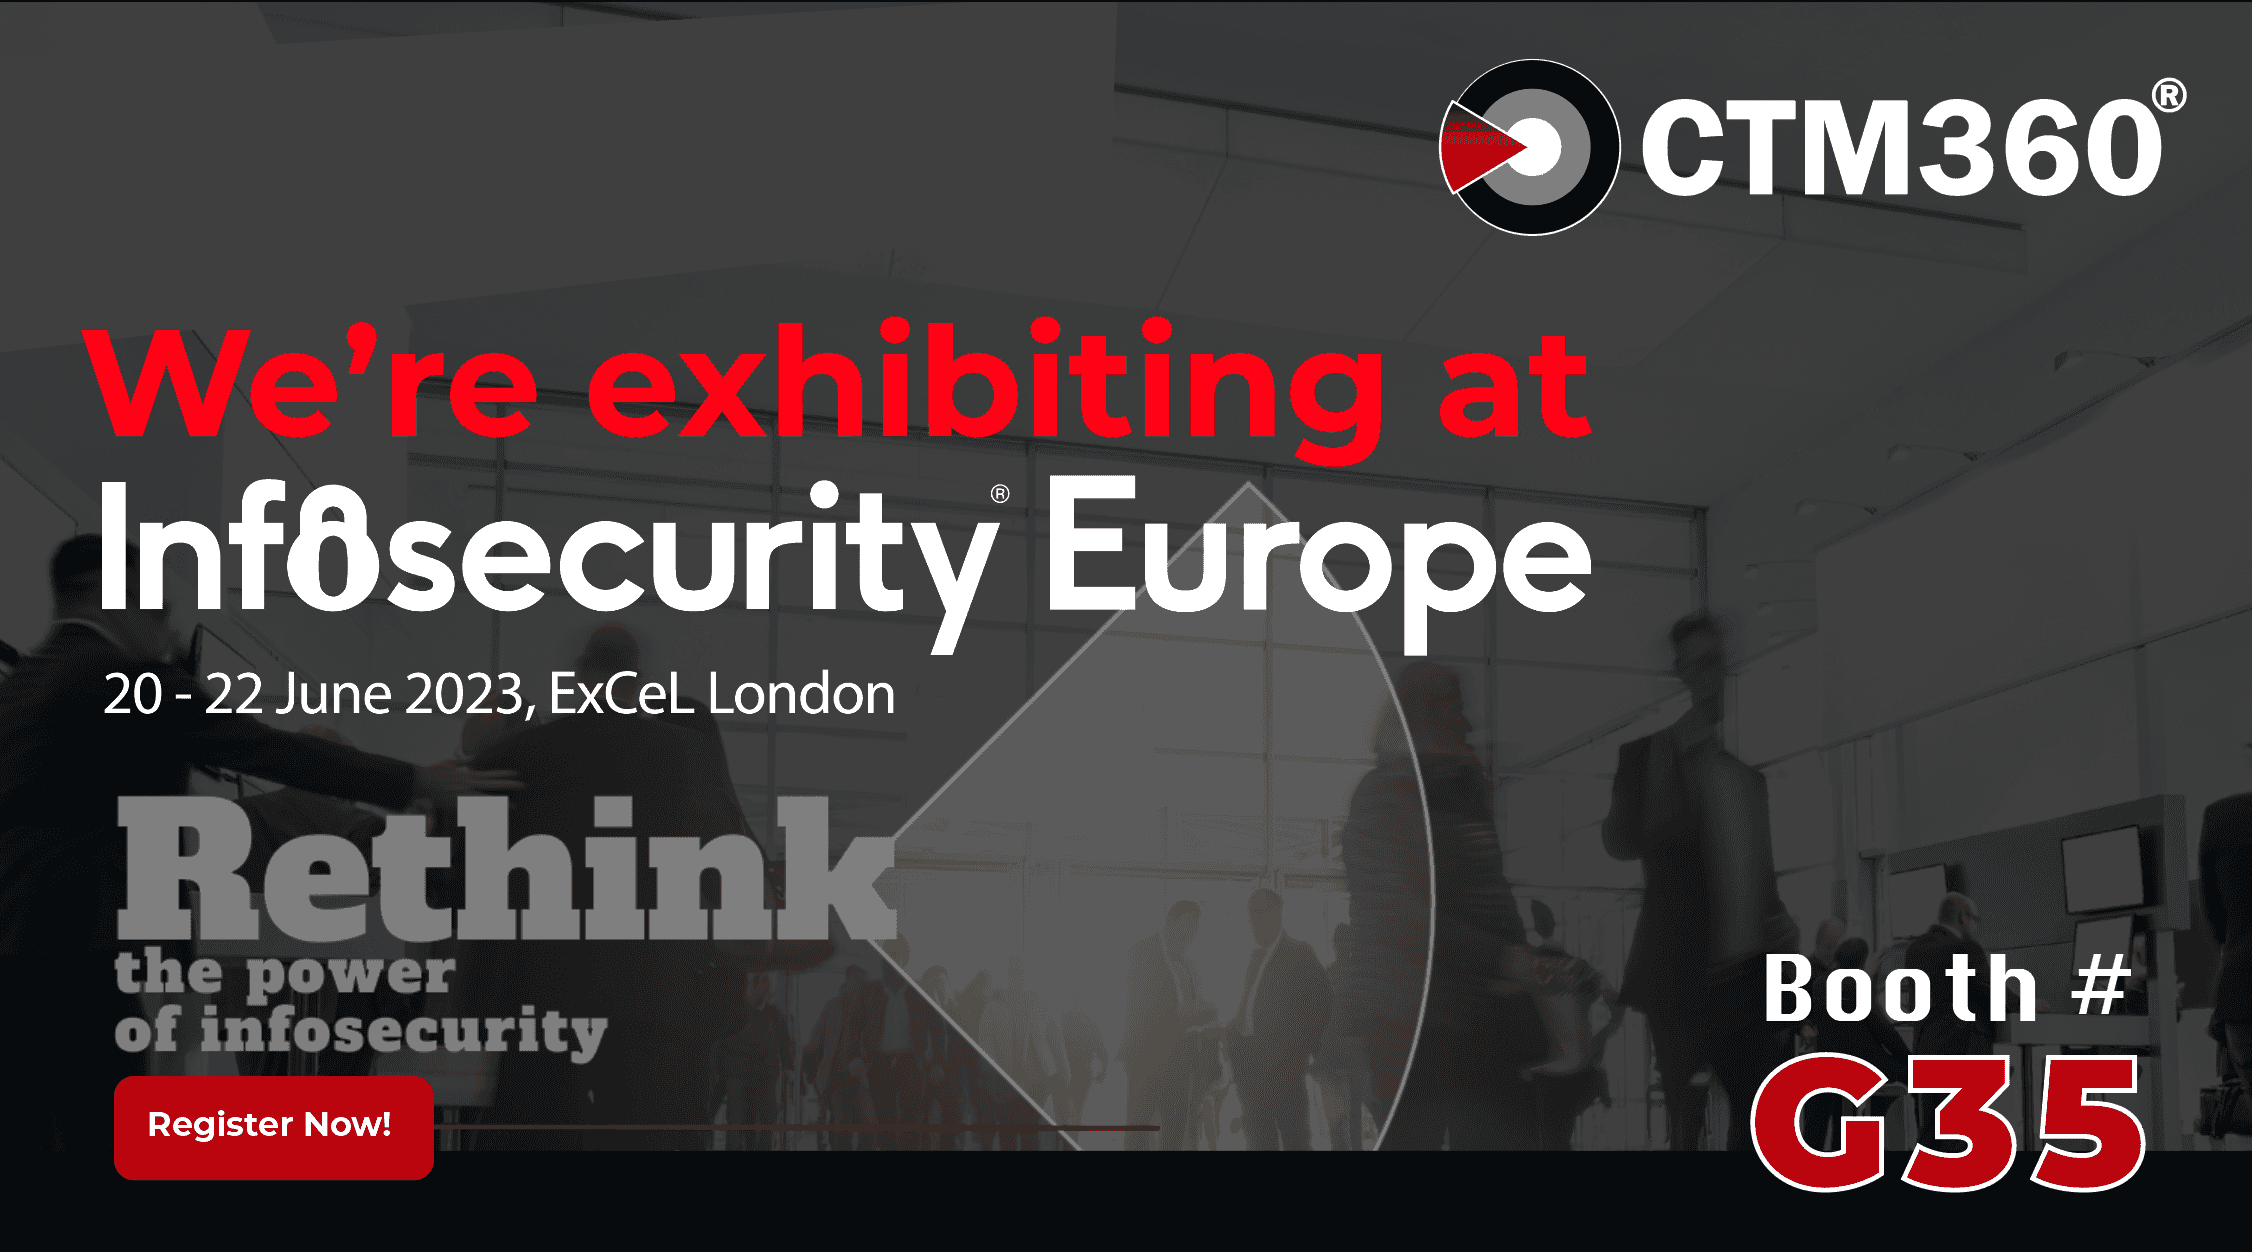 CTM360 to participate at Infosecurity Europe 2023